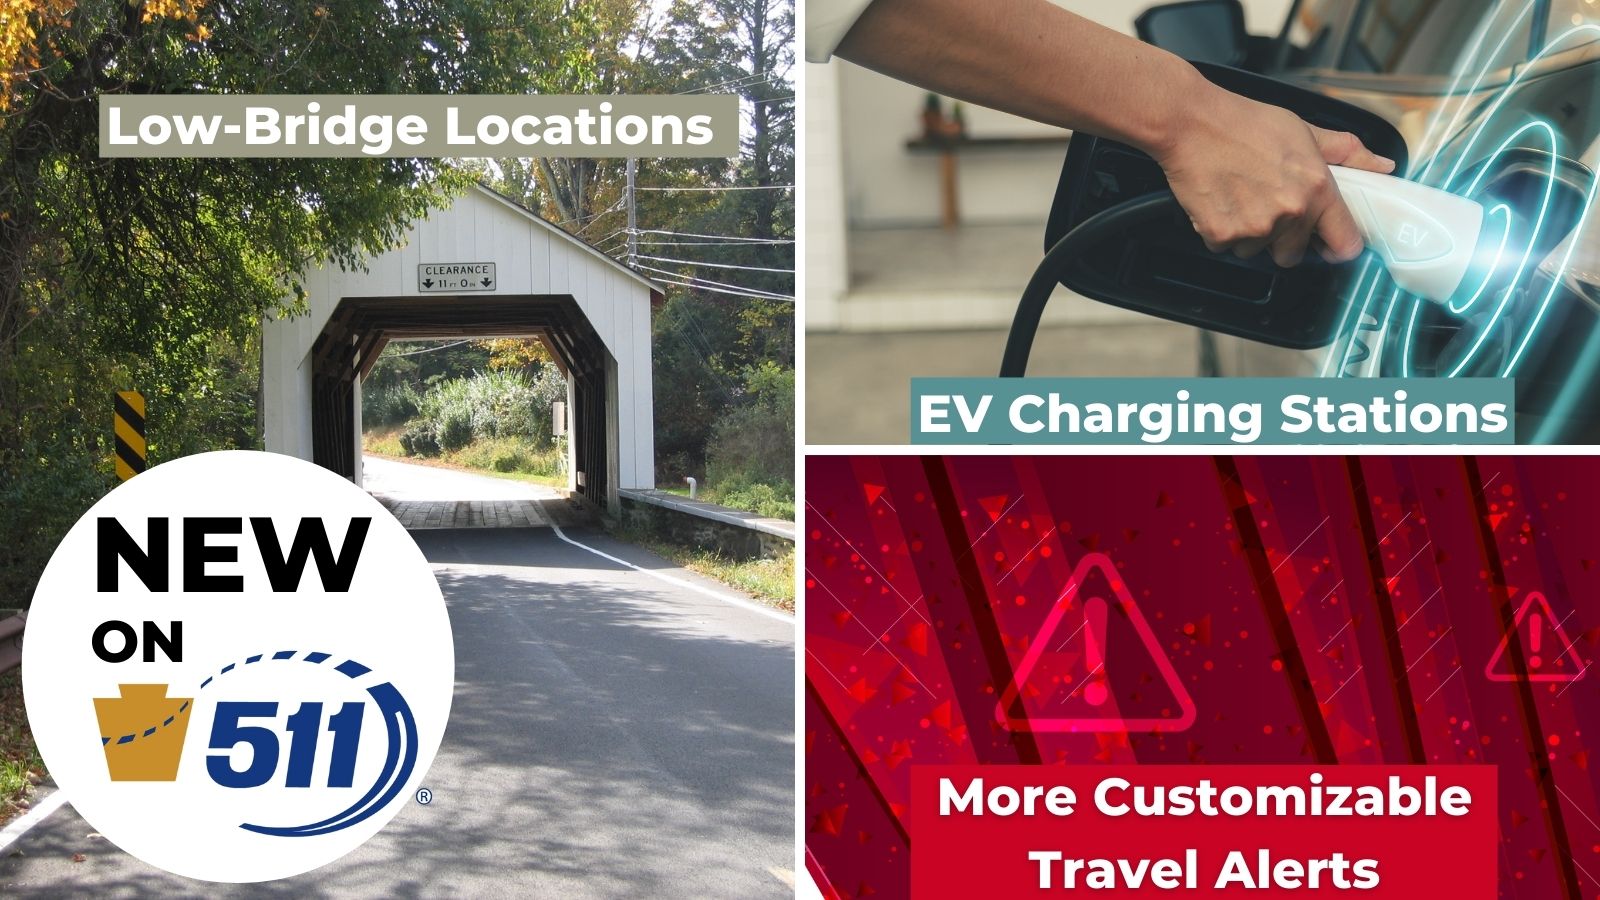 An infographic showing the new information available on 511PA including low bridge locations, electric vehicle charging stations and customizable alerts